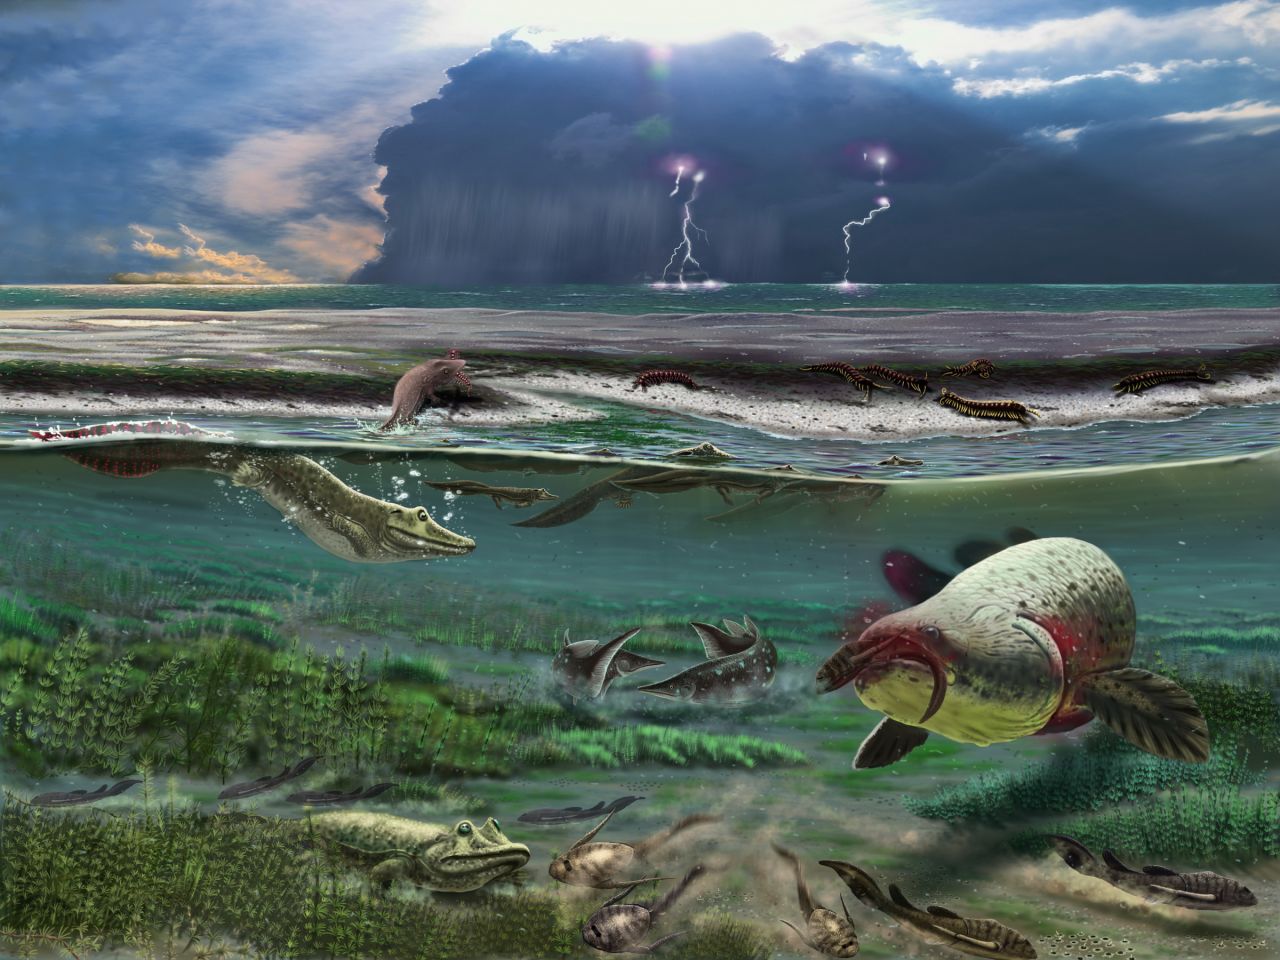 The Sosnogorsk lagoon as it likely appeared 372 million years ago just before a deadly storm, according to an artist's rendering. The newly discovered tetrapod can be seen in the left side of the image below the surface.